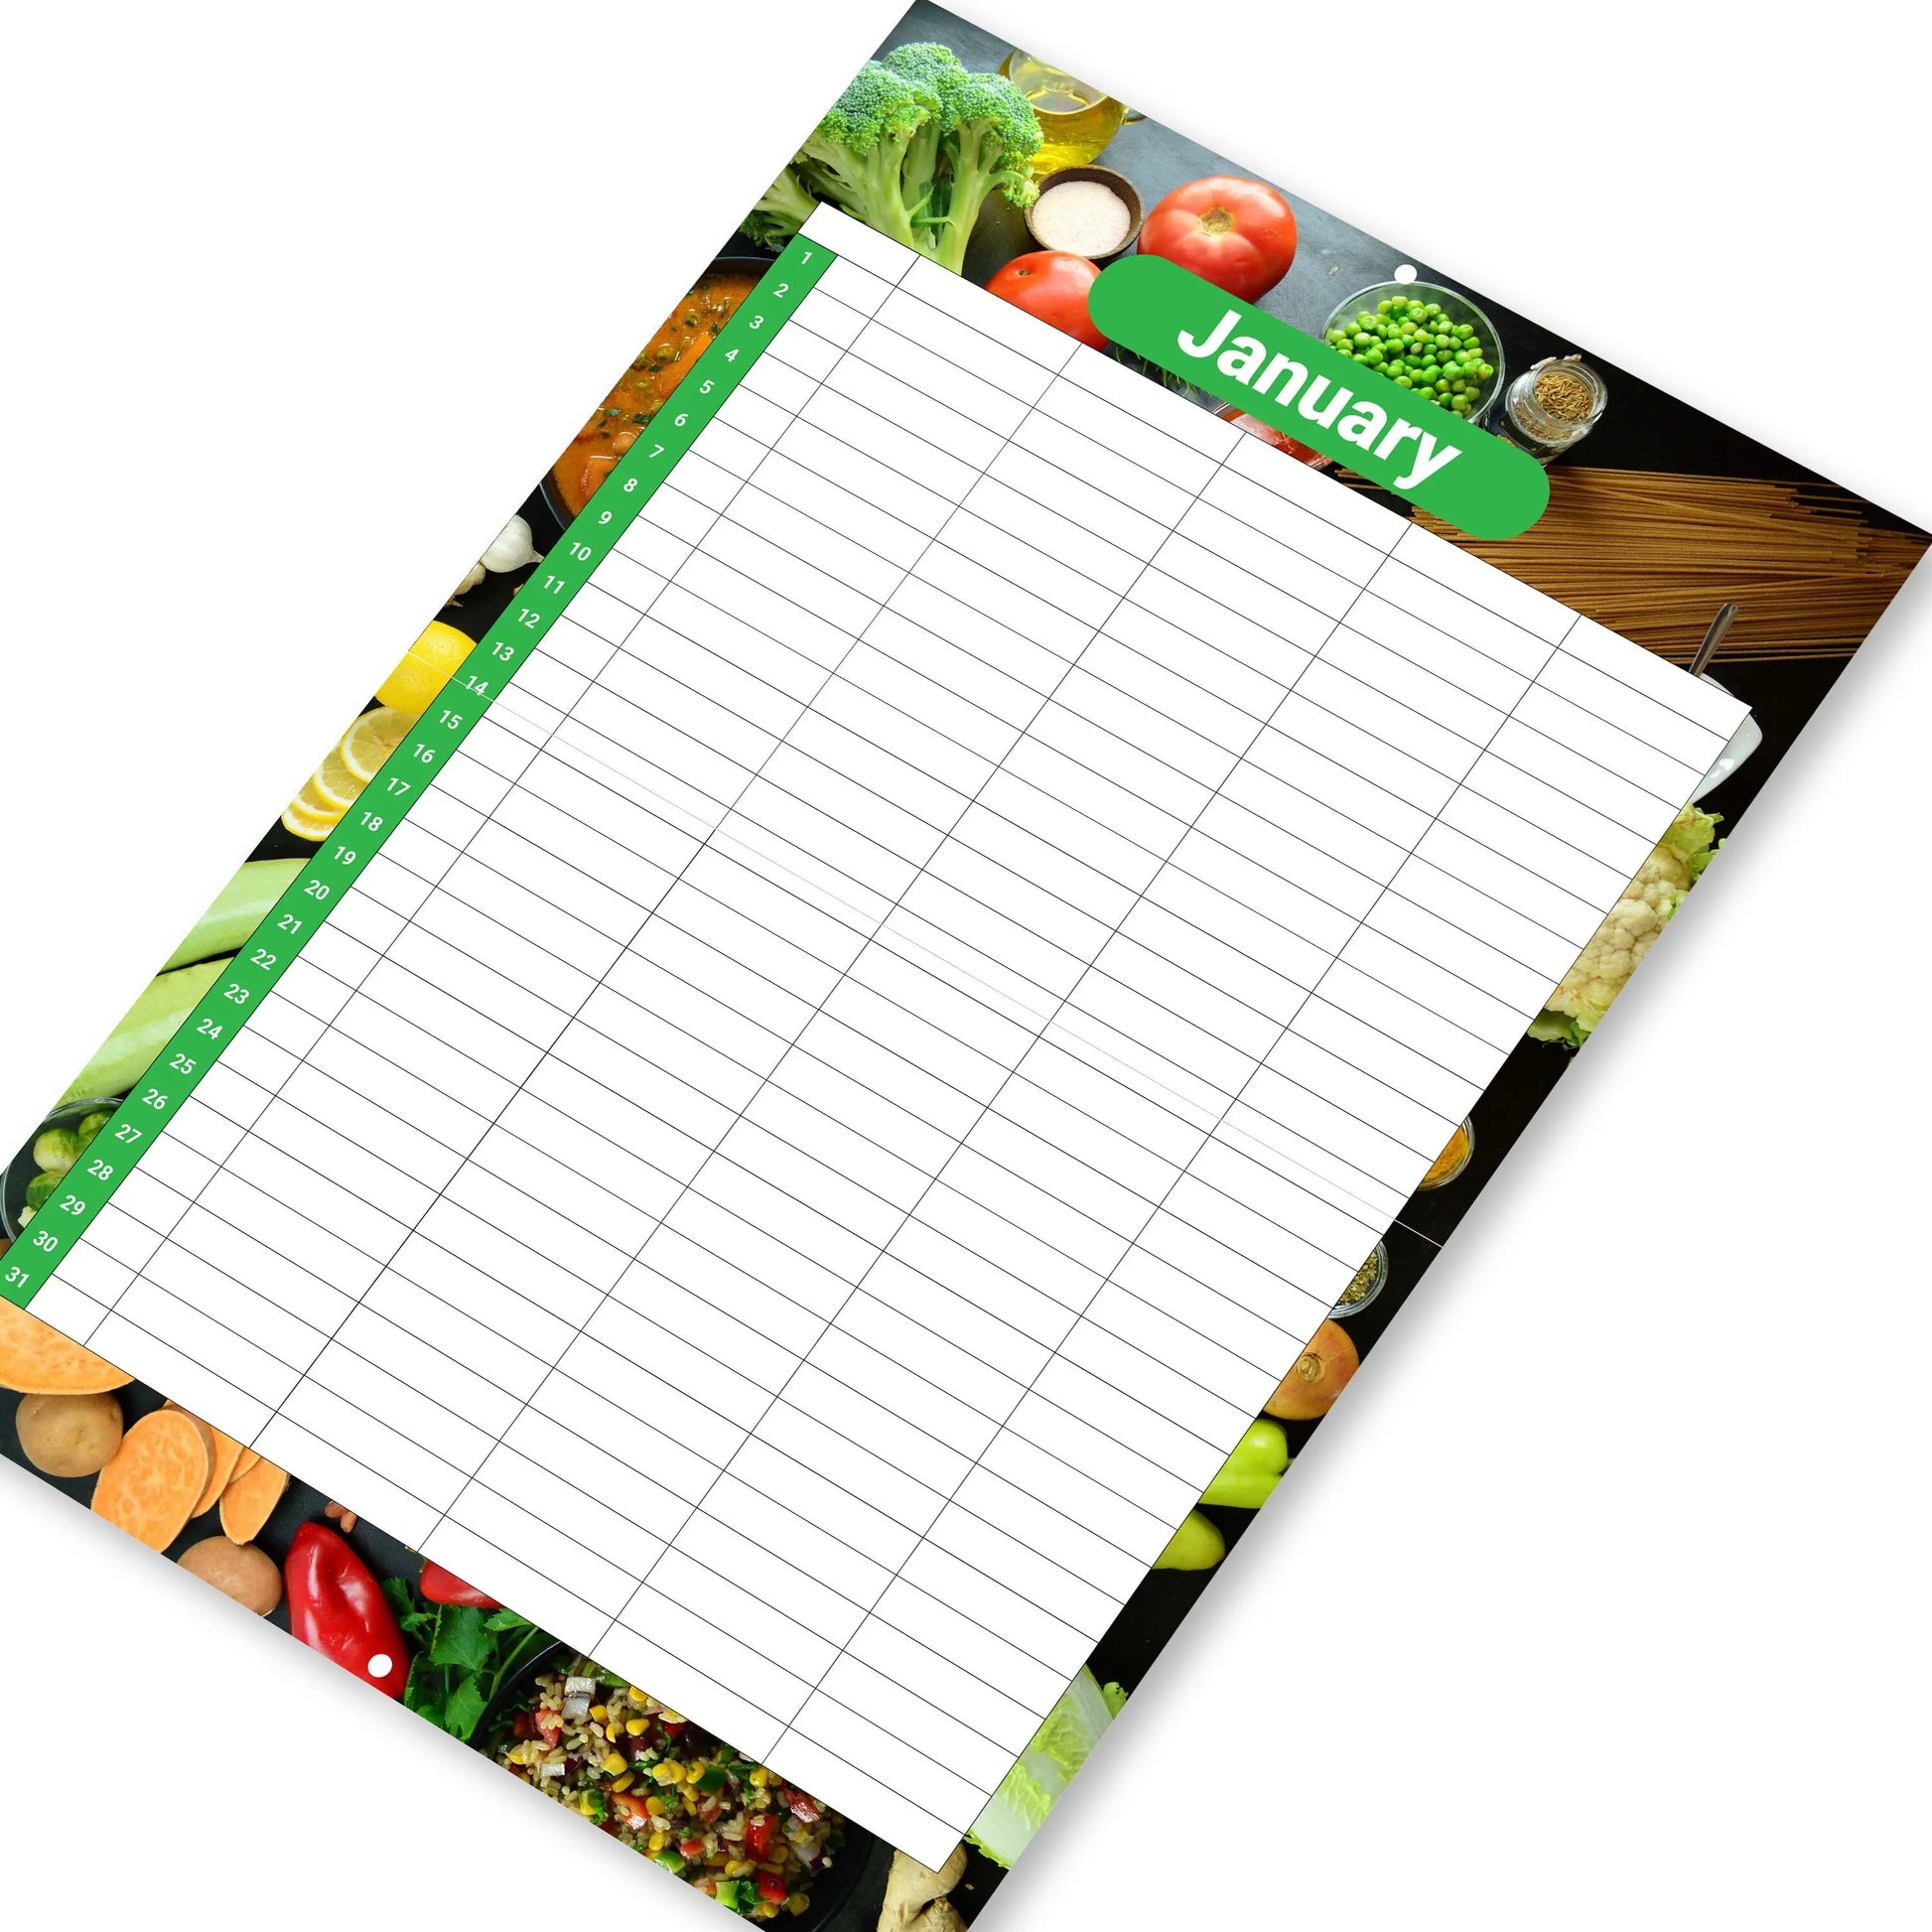 meal Planner Calendar food journal Diet Diary Slimming Weight Loss Tracker Dieting Keechi & co.